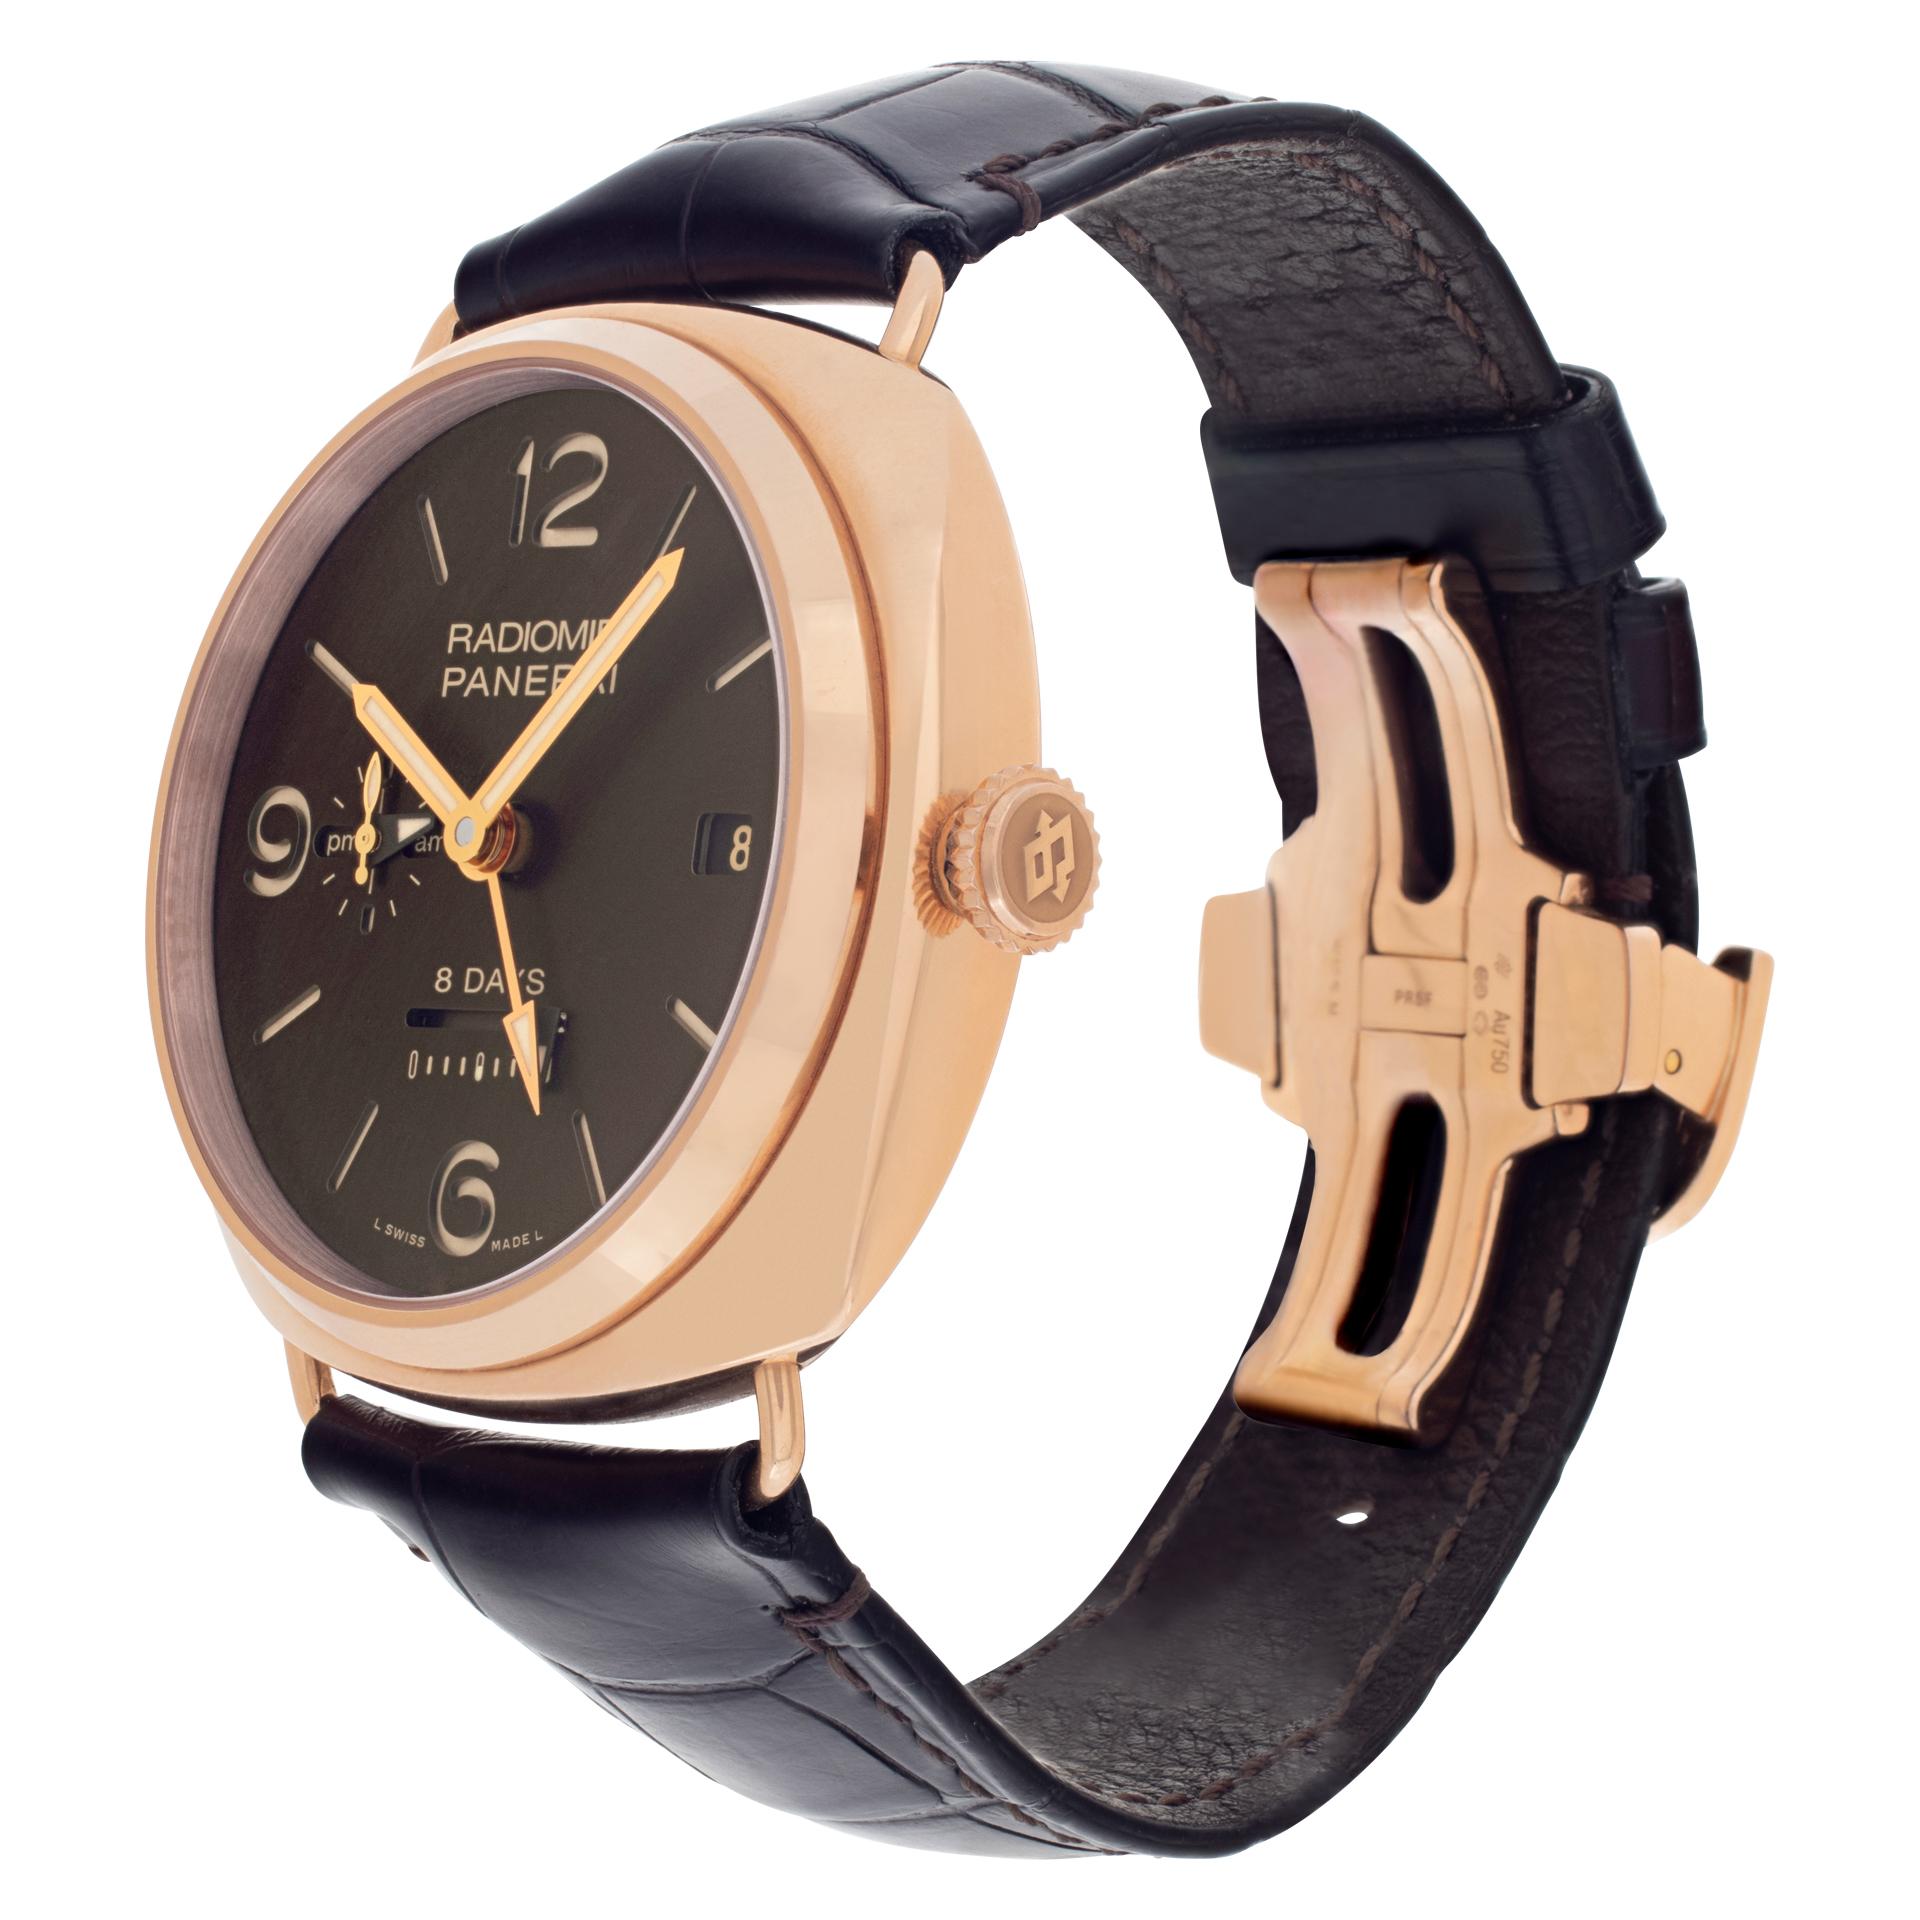 Panerai Radiomir 8 Days GMT Oro Rosso in 18k rose gold on leather strap. Manual w/ subseconds, date, power reserve indicator, dual time and 24 hour indicator.  45 mm case size. Limited Edition of 500 pieces. With box and papers. Ref PAM395. Fine